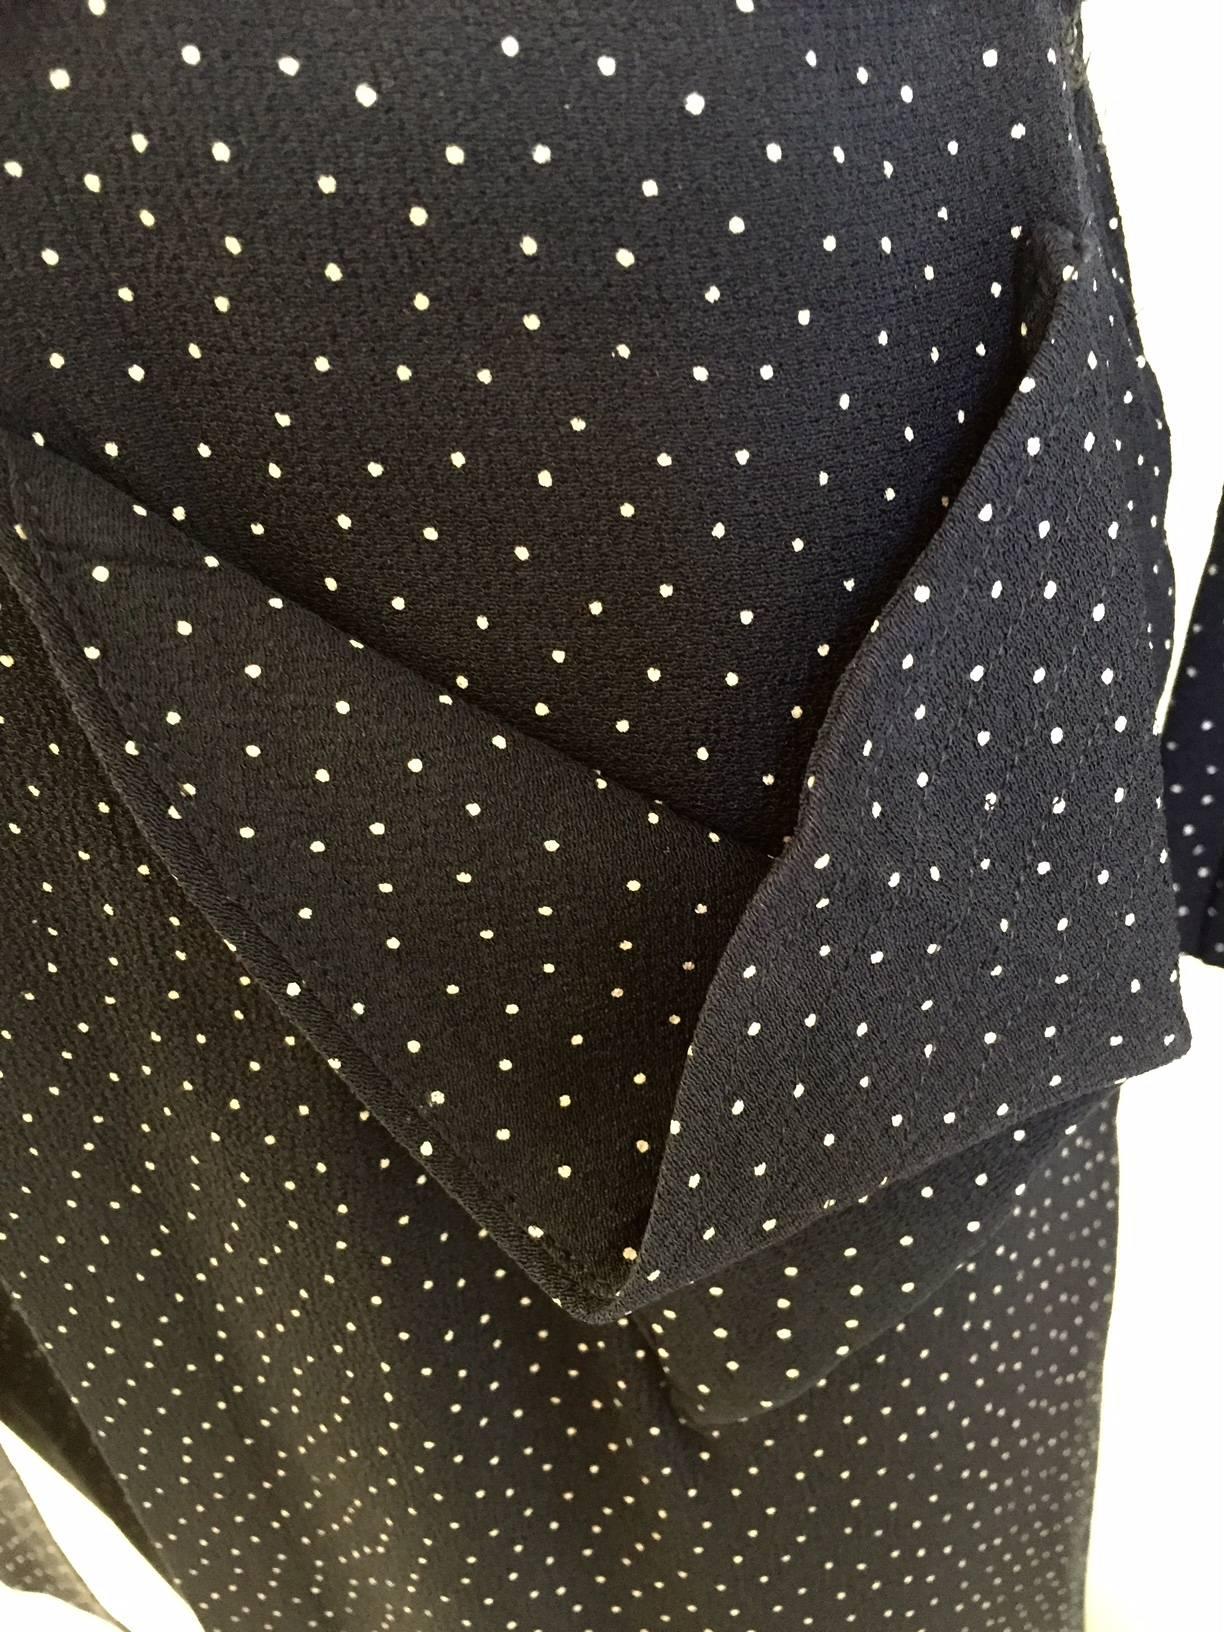 Women's Vintage 1940s Navy Blue Crepe Dress with White Small Polkadots